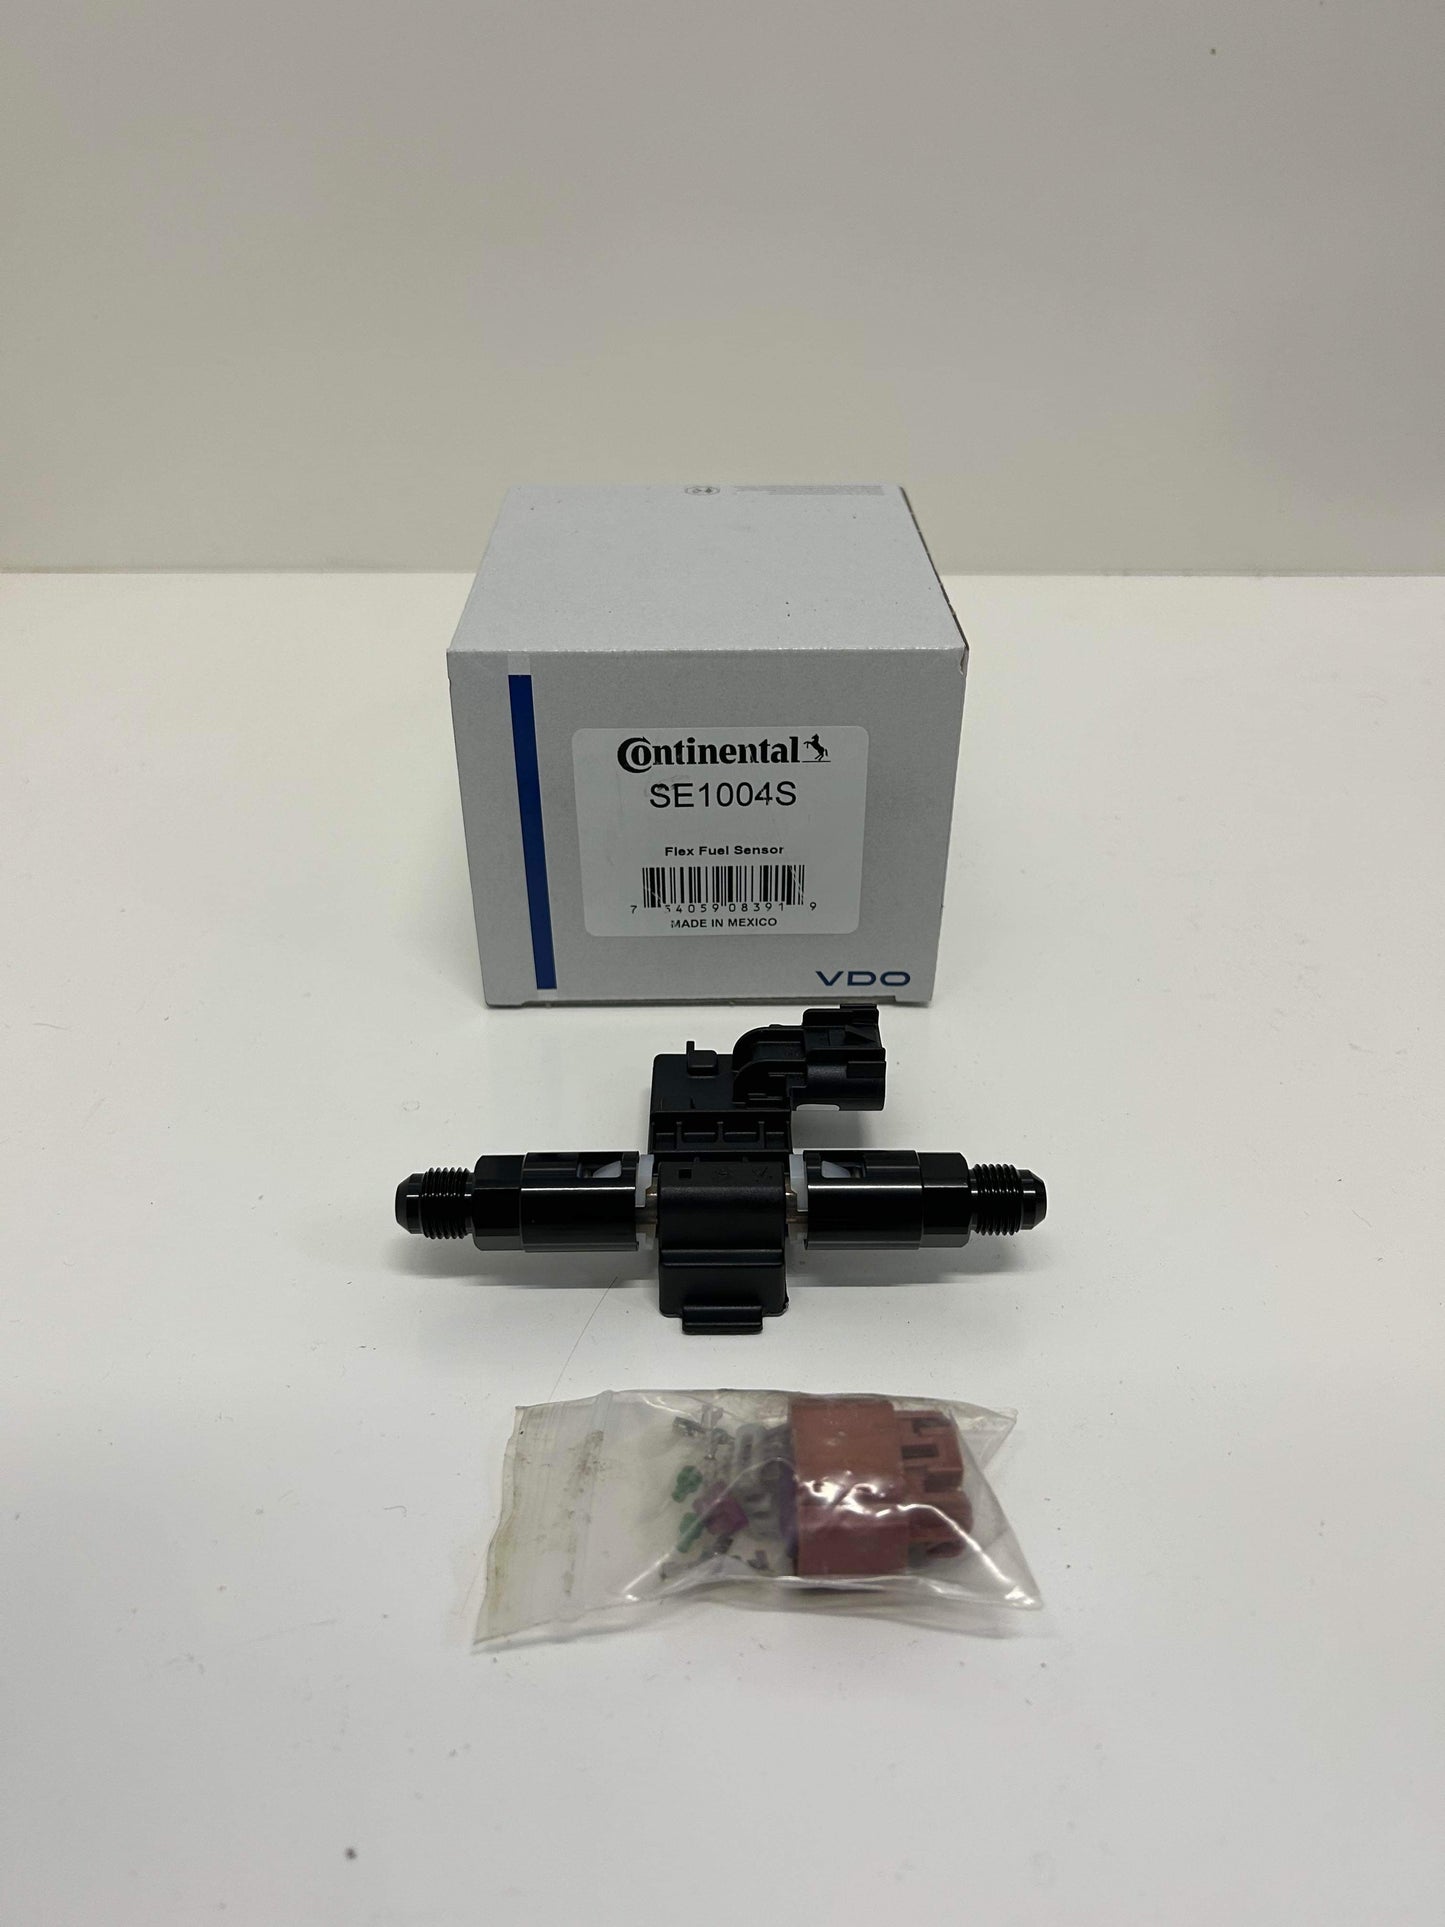 VDO Continental Flex Fuel Sensor w/ 6AN Fittings and connector